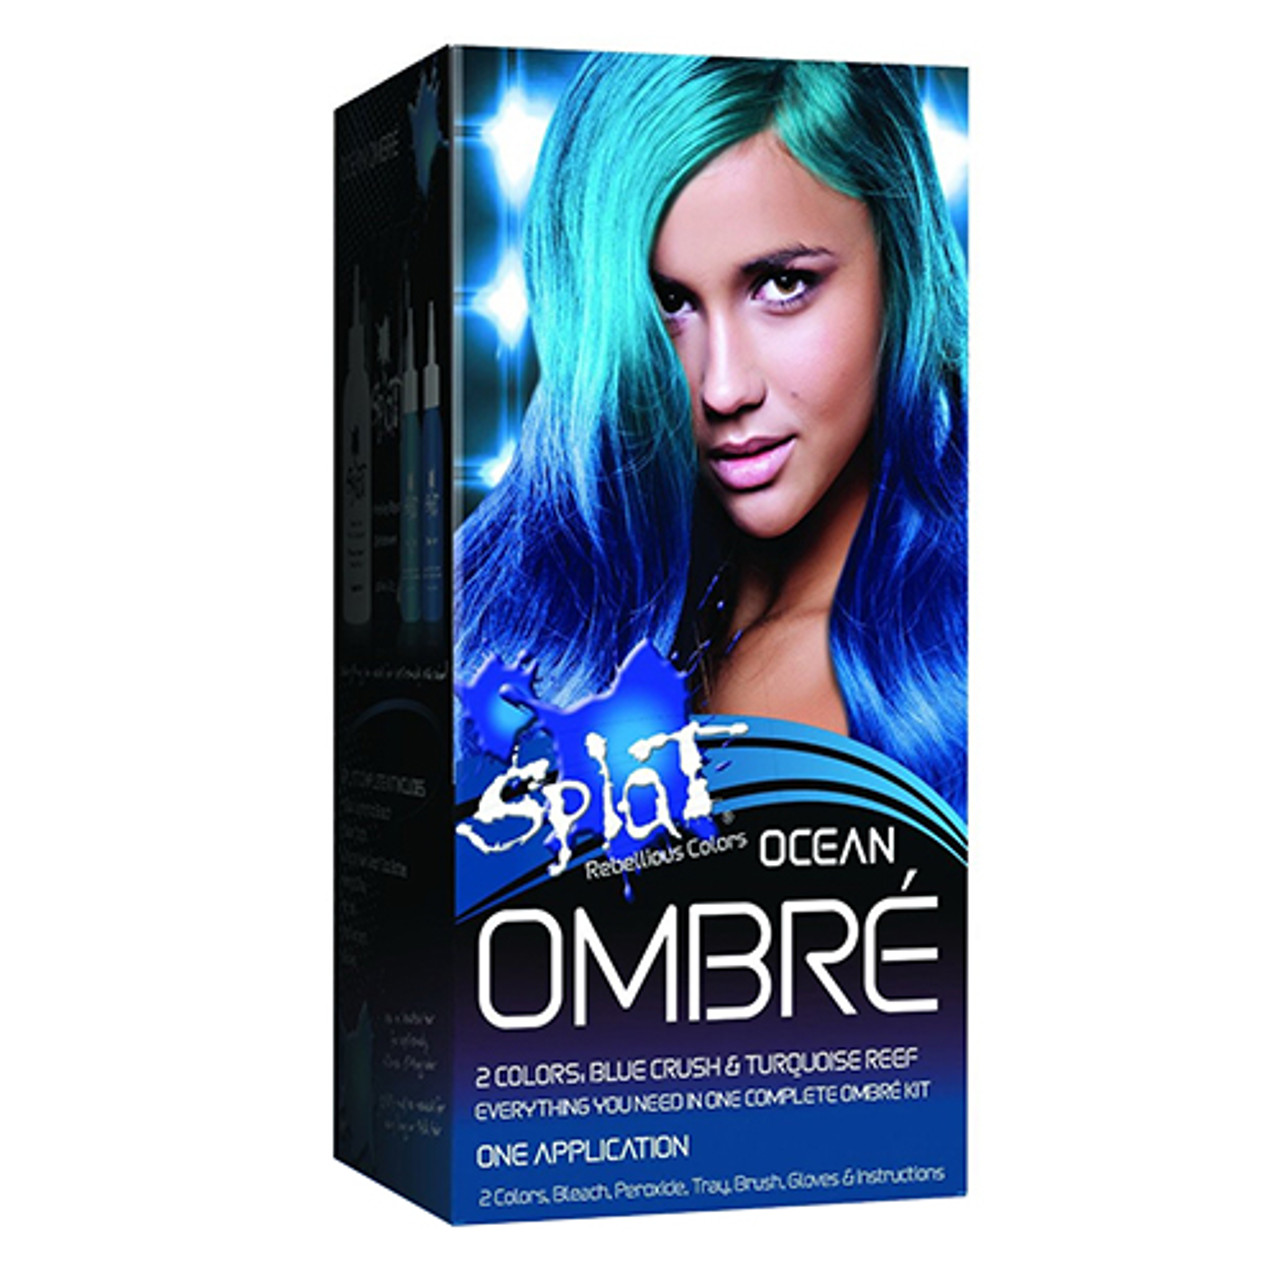 Splat Rebellious Colors Ocean Ombre Blue Crush And Turquoise Reef Hair  Color Kit, 1 Ea 